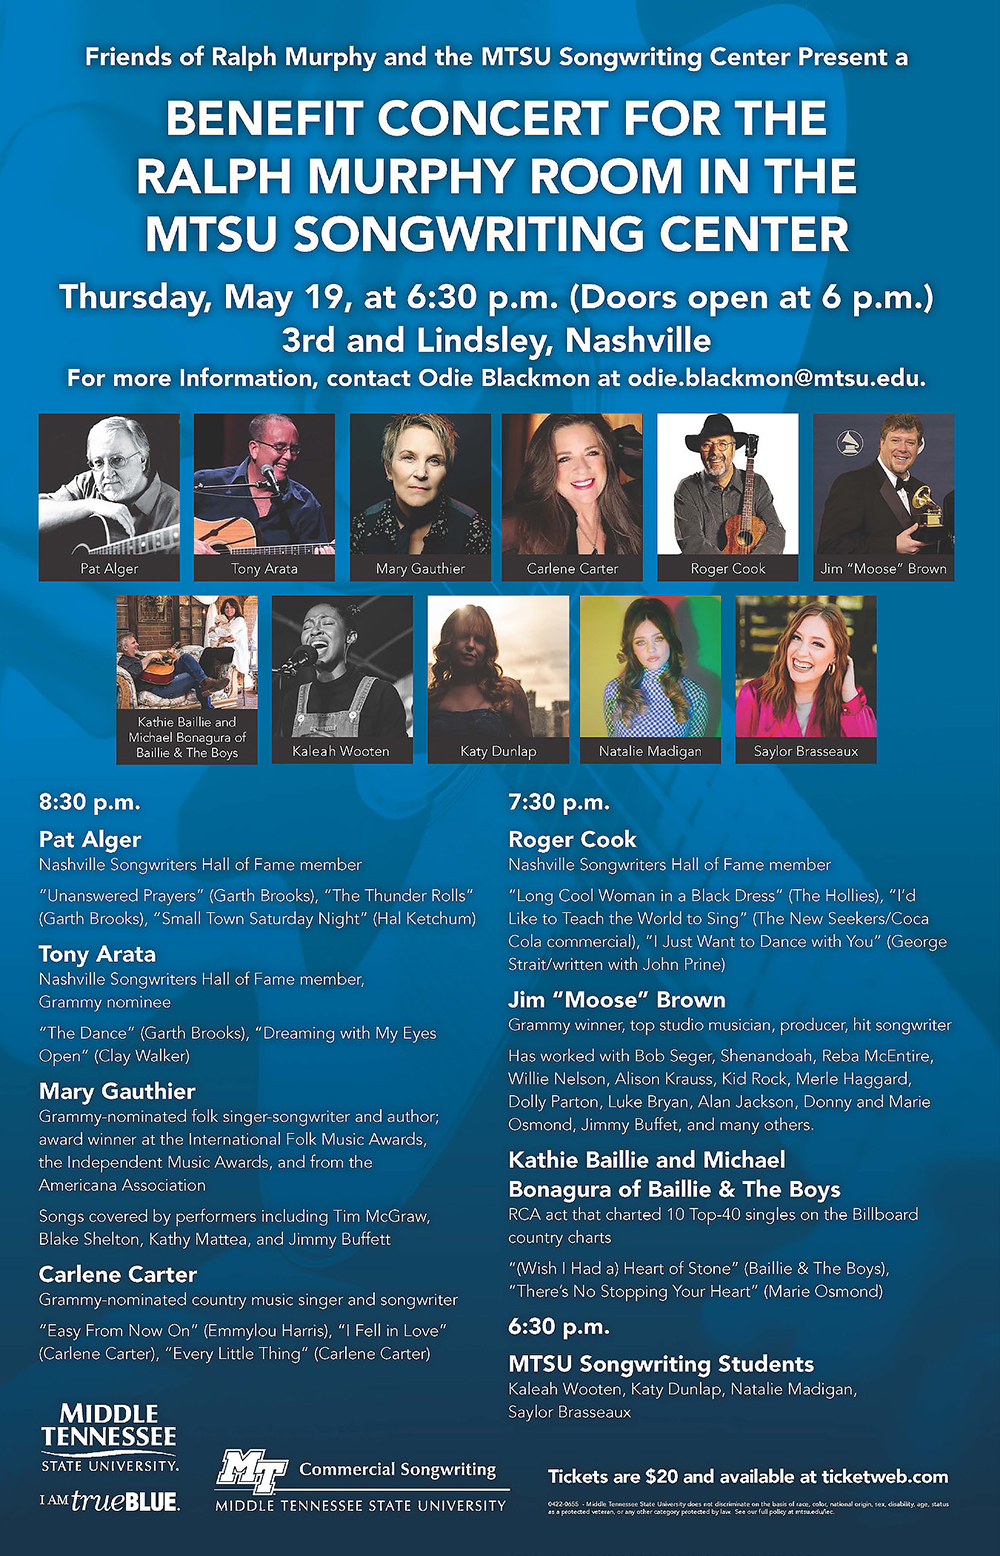 poster for Thursday, May 19, “Friends of Ralph Murphy and MTSU Songwriting Benefit Concert" at 3rd and Lindsley in Nashville